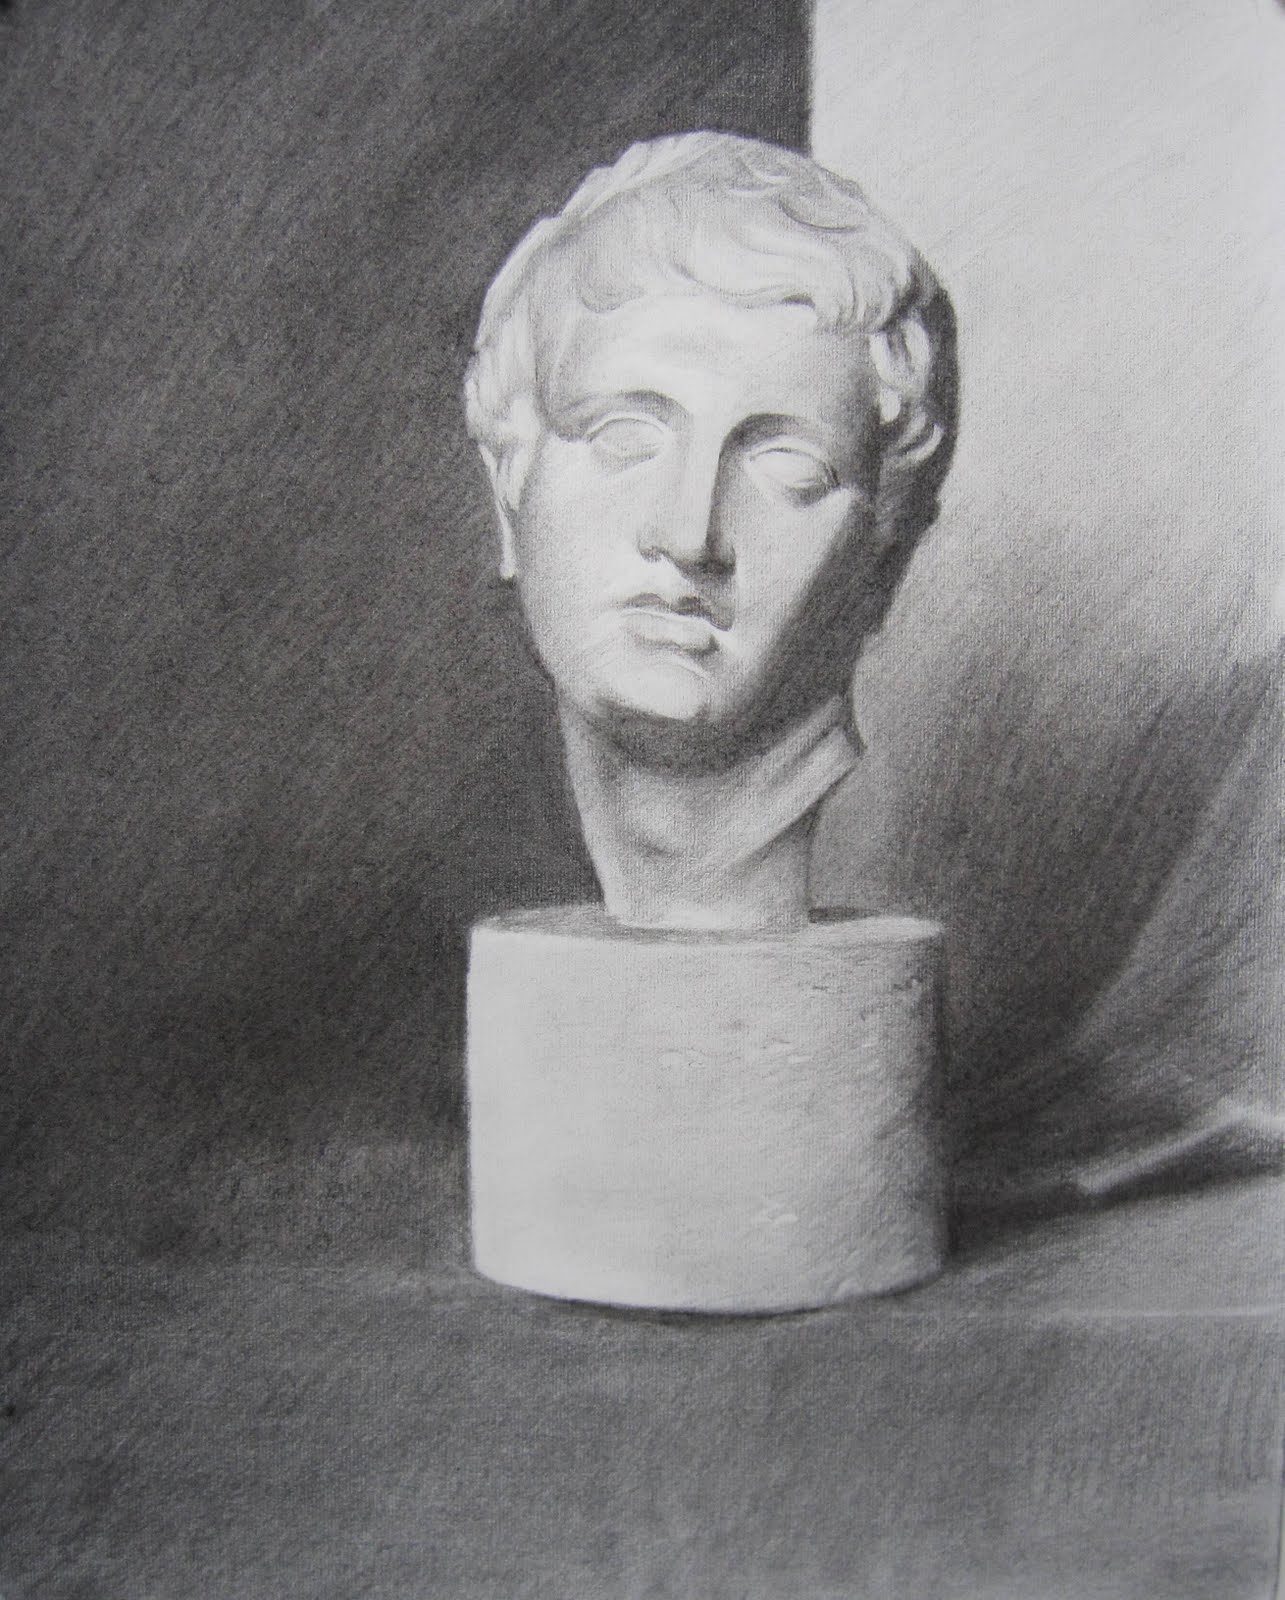 Sandra Galda's Oil Painting: exercise in cast bust drawing